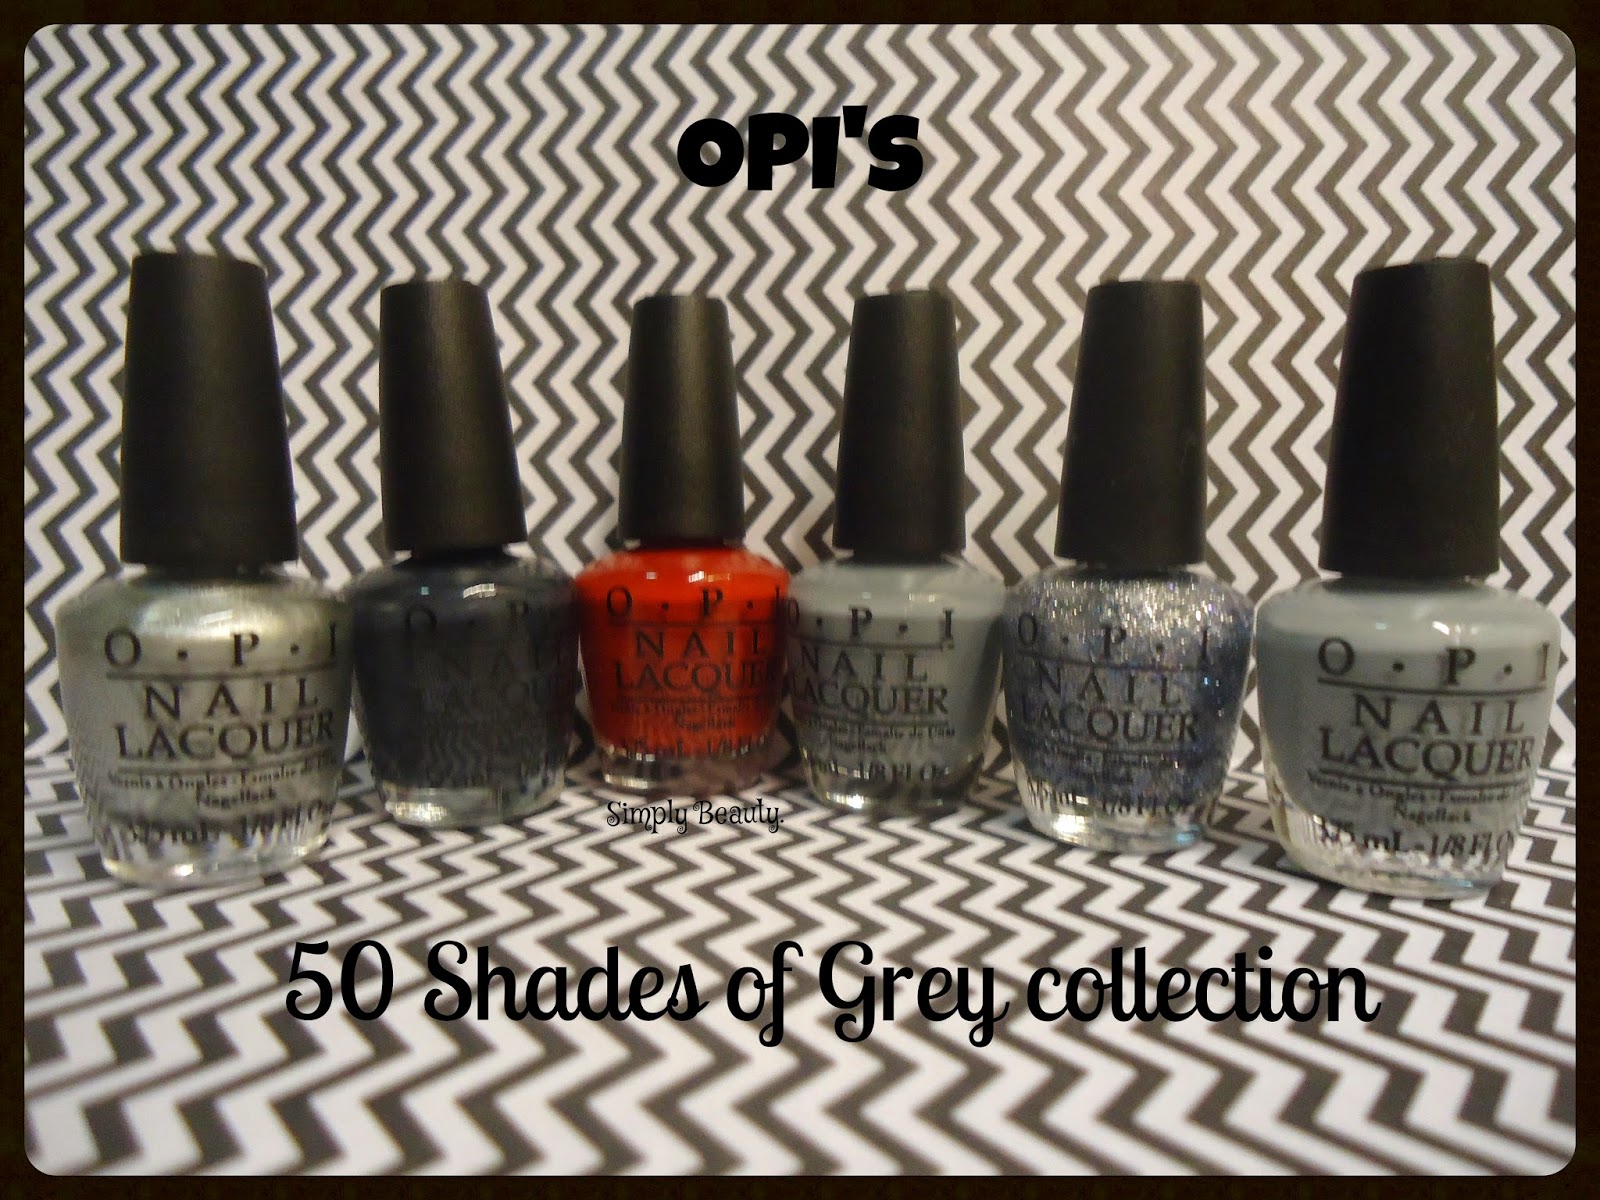 Simply Beauty.: OPI: 50 Shades of Grey mini collection (part 1)